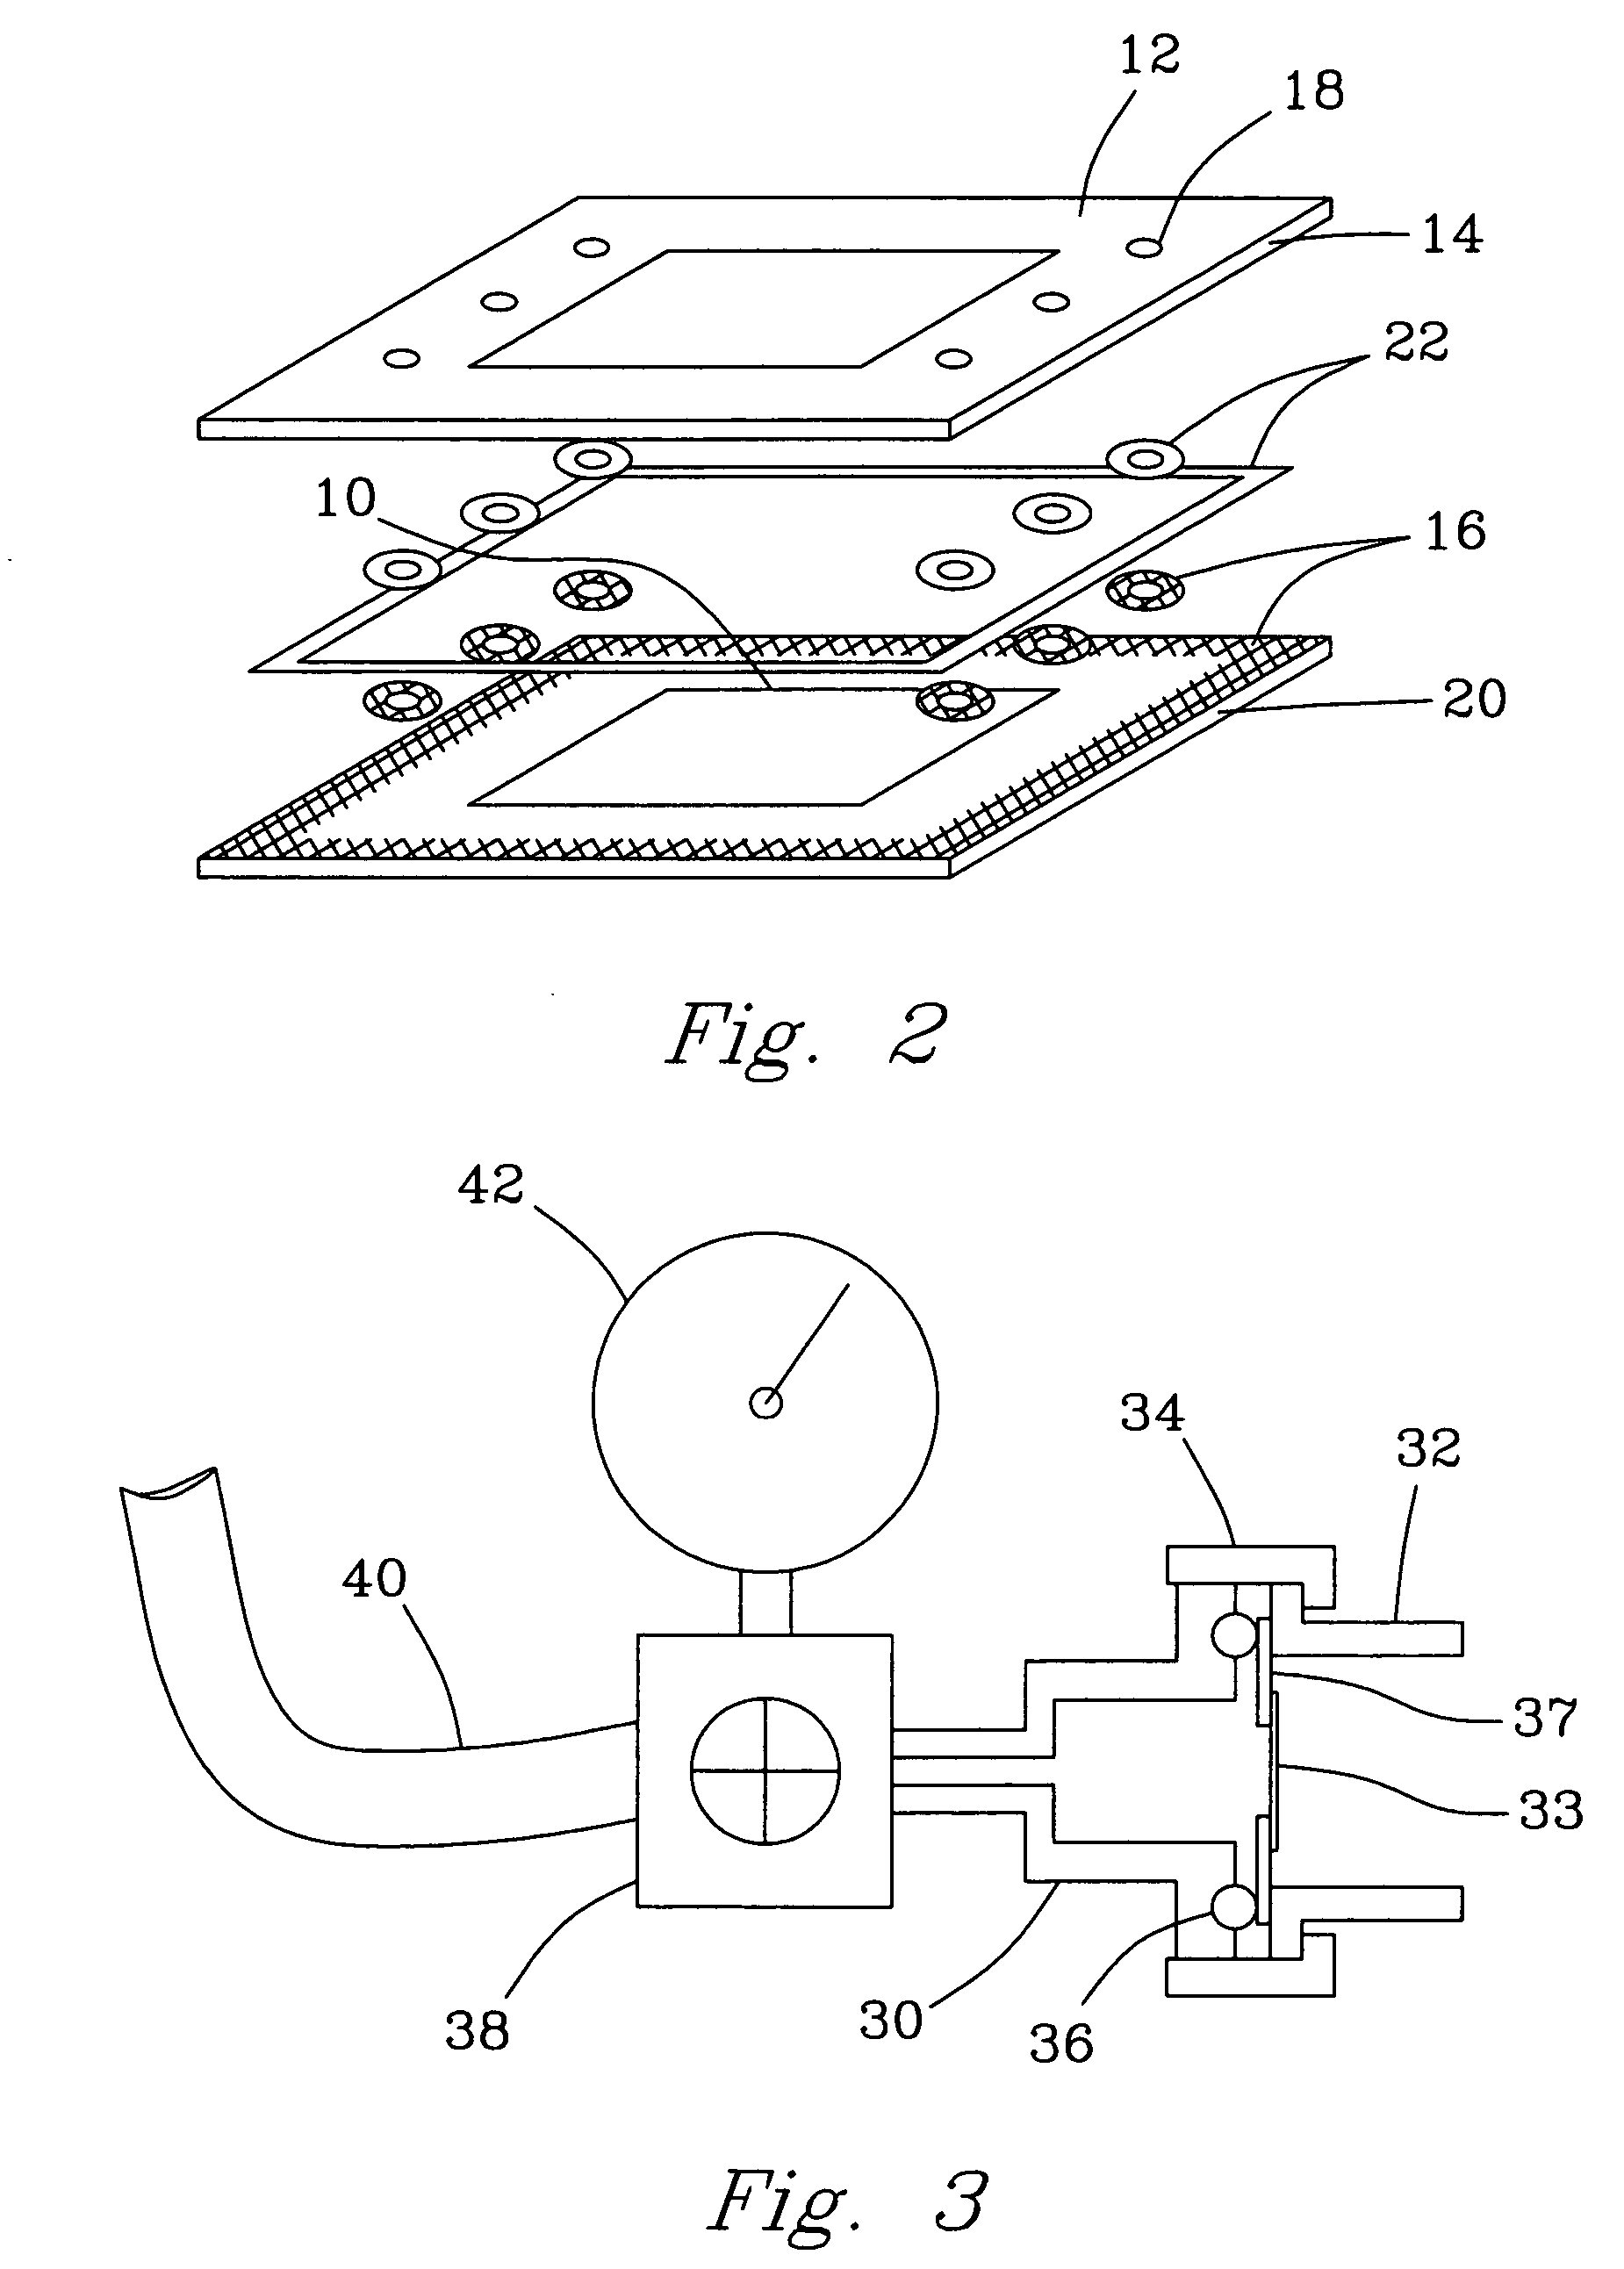 High strength insulating metal-to-ceramic joints for solid oxide fuel cells and other high temperature applications and method of making